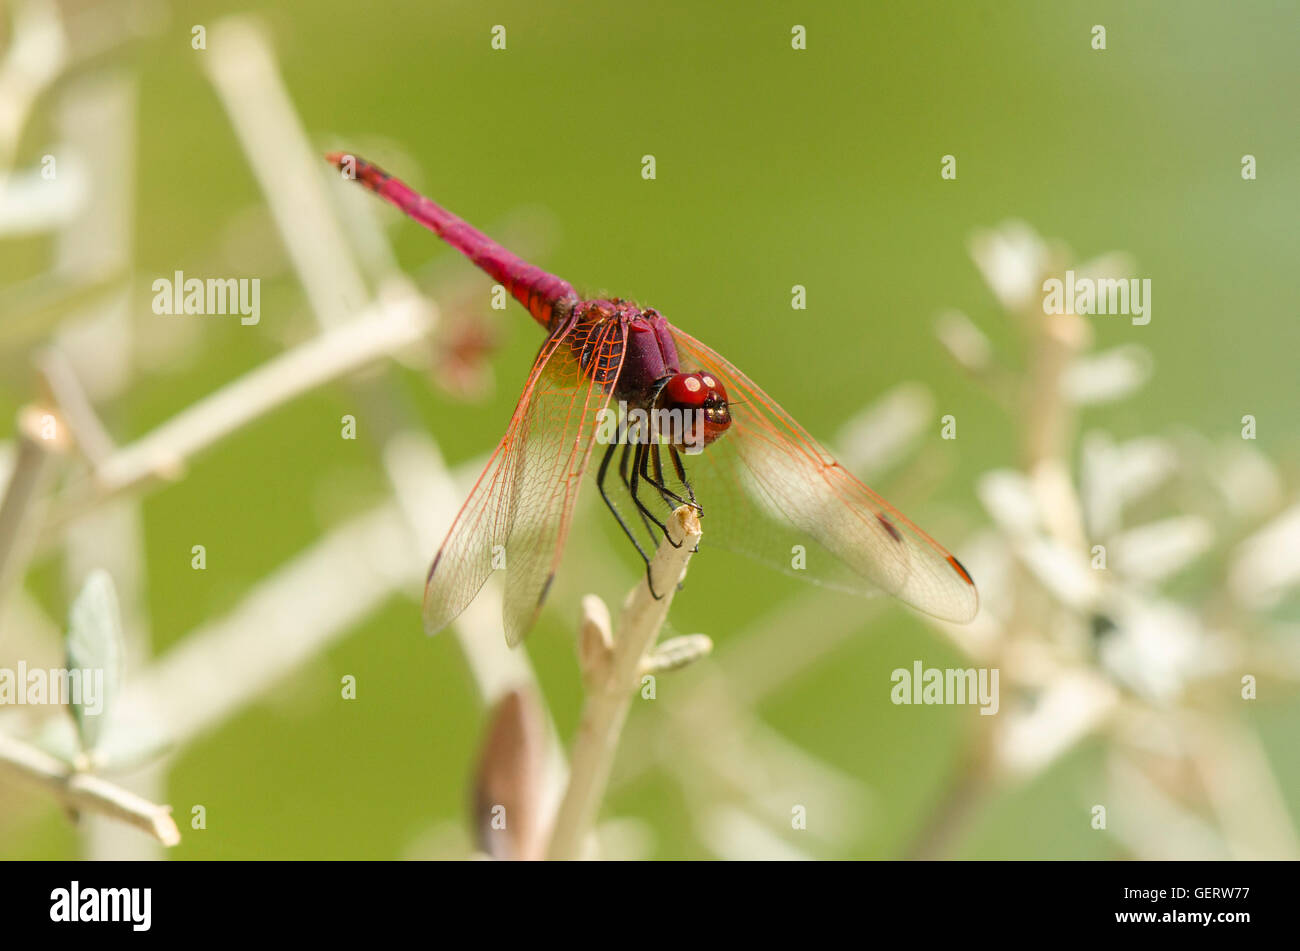 Broad scarlet, common scarlet-darter, scarlet darter, Crocothemis erythraea, dragonfly, Andalusia, Spain. Stock Photo